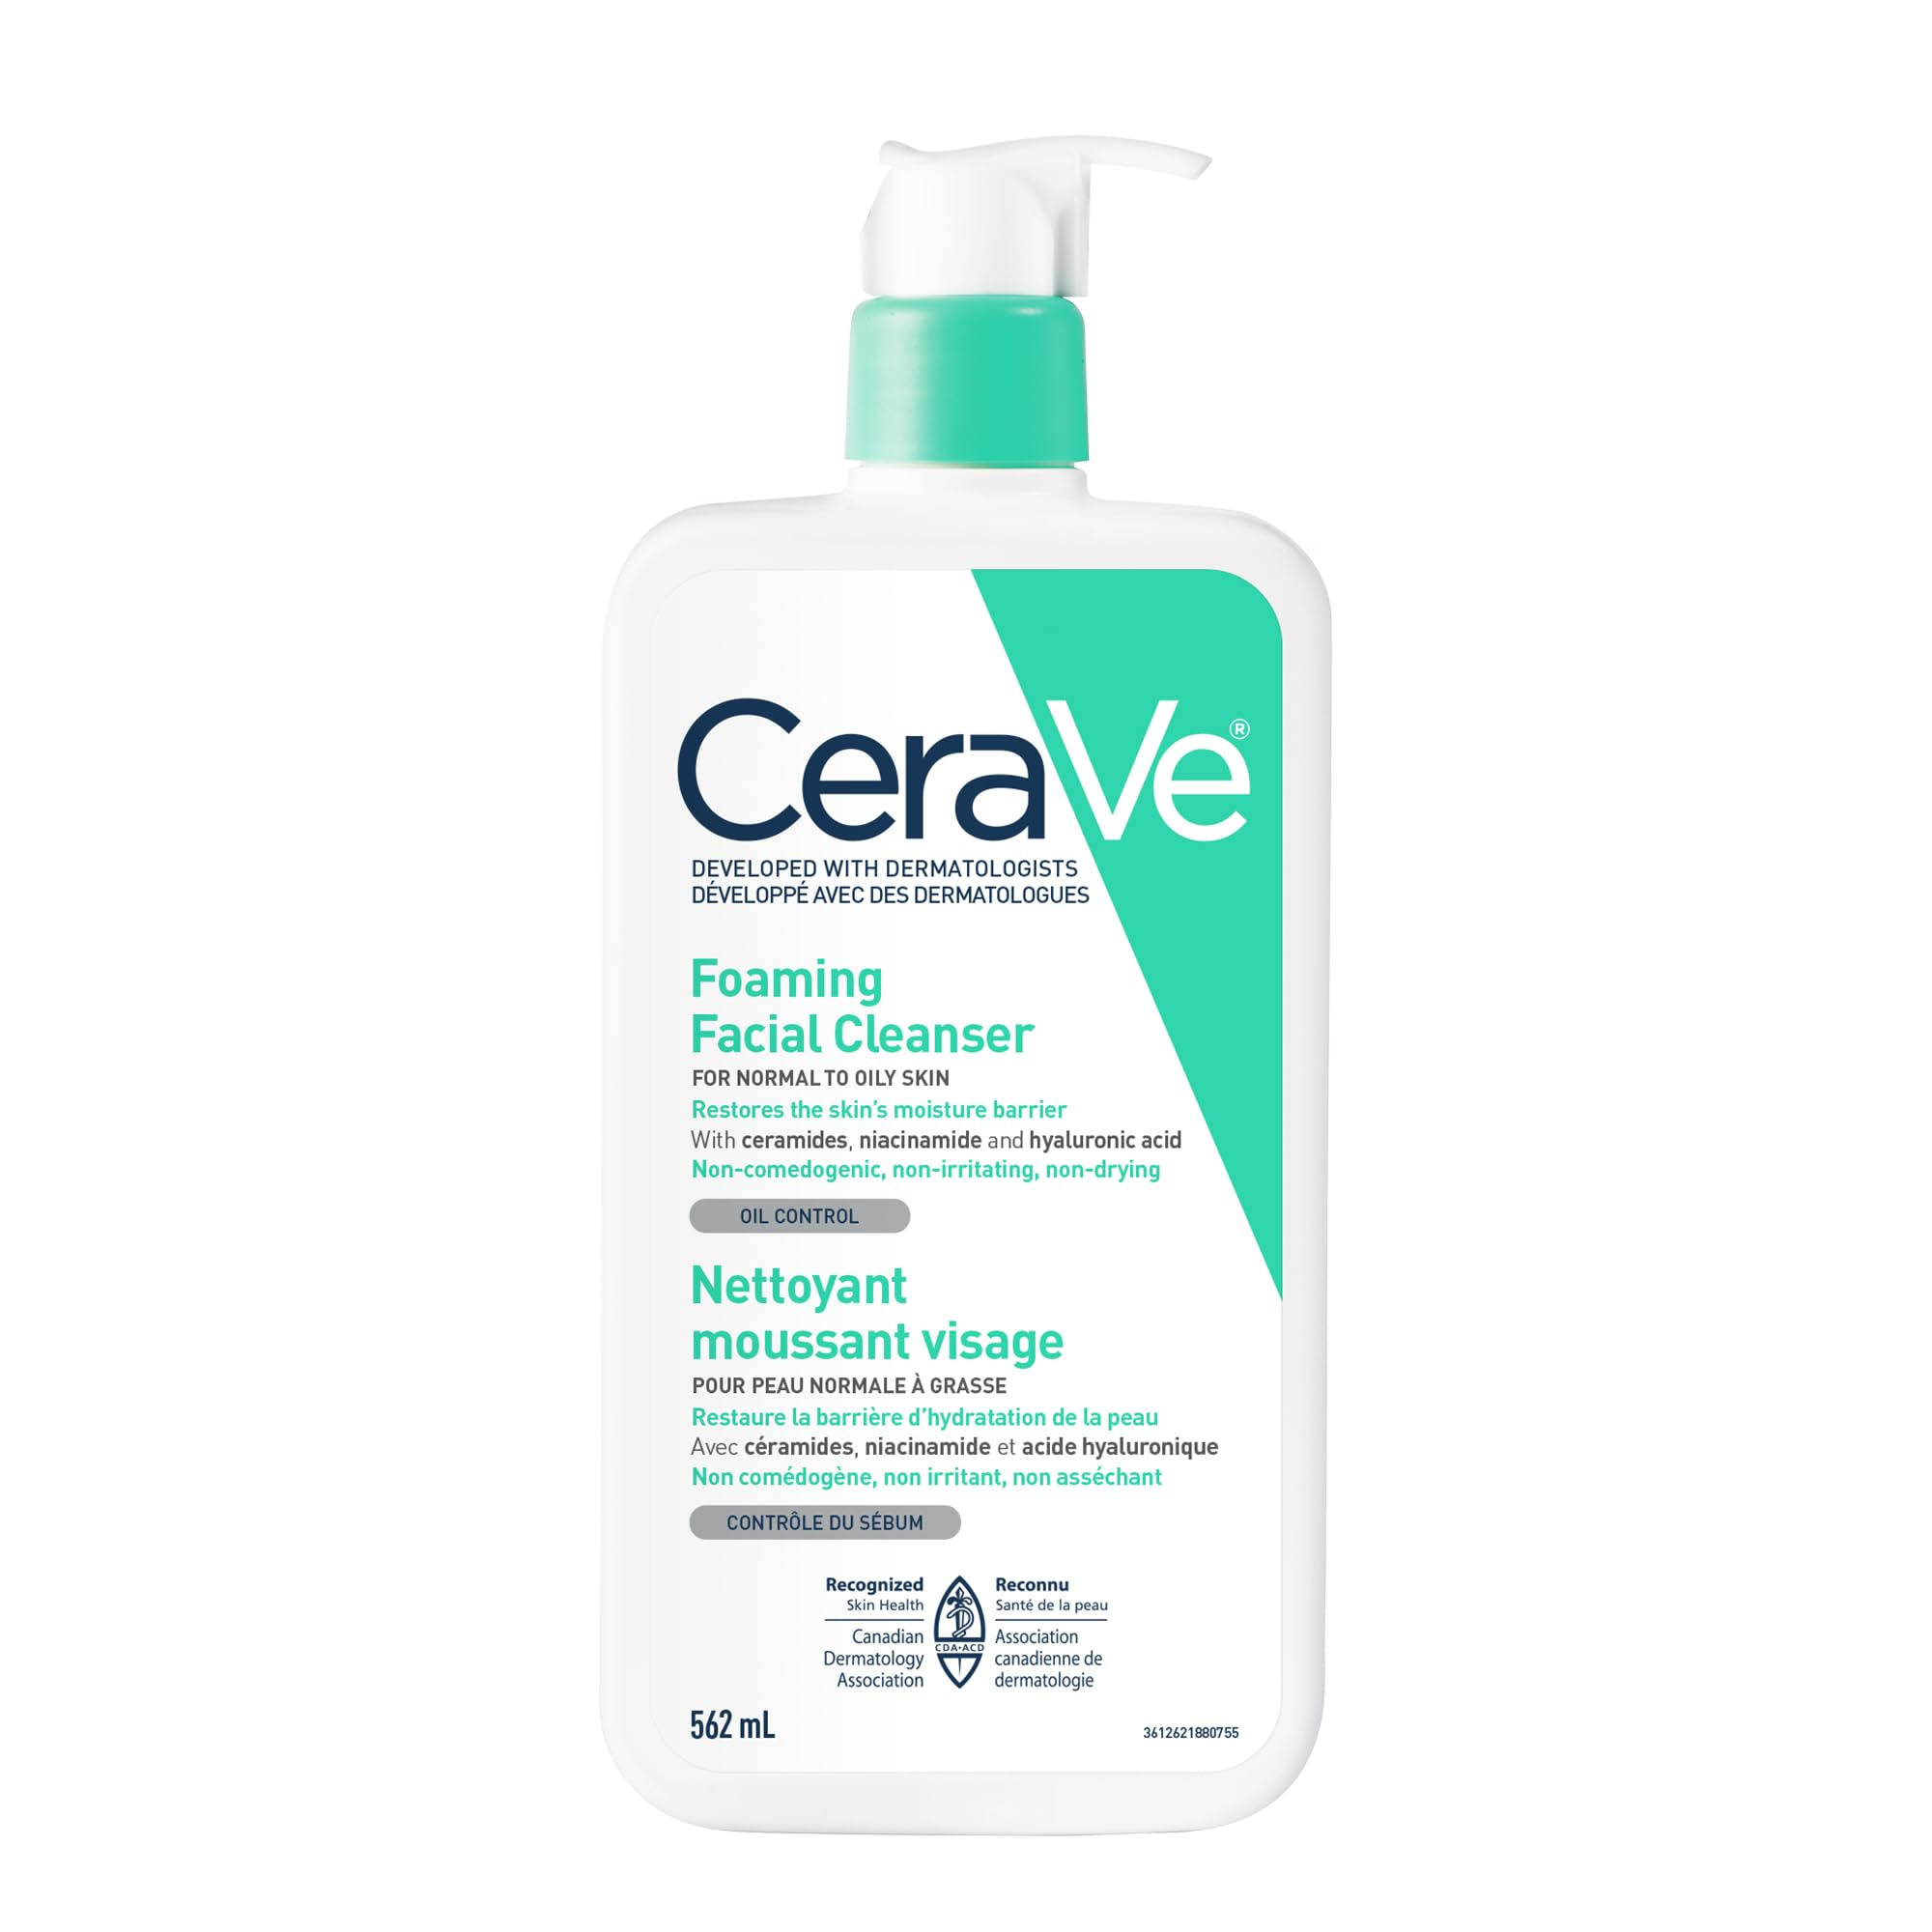 CeraVe Foaming Facial Cleanser - 562 ml